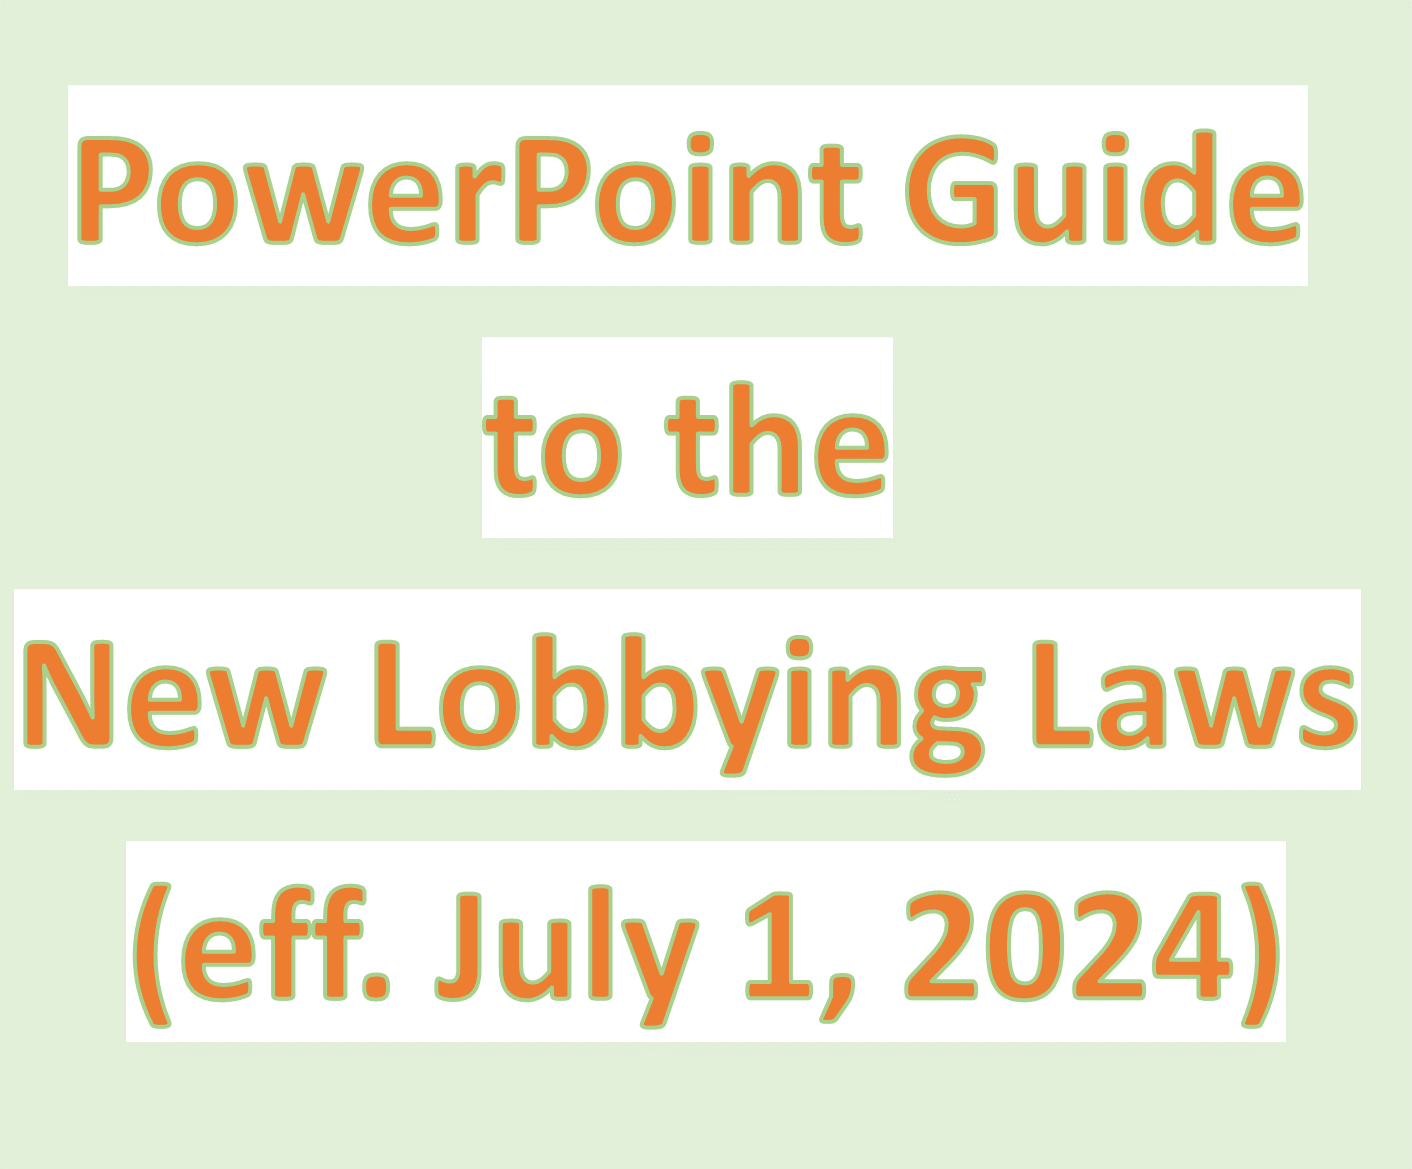 PowerPoint Guide to the New Lobbying Laws (eff. July 1, 2024)